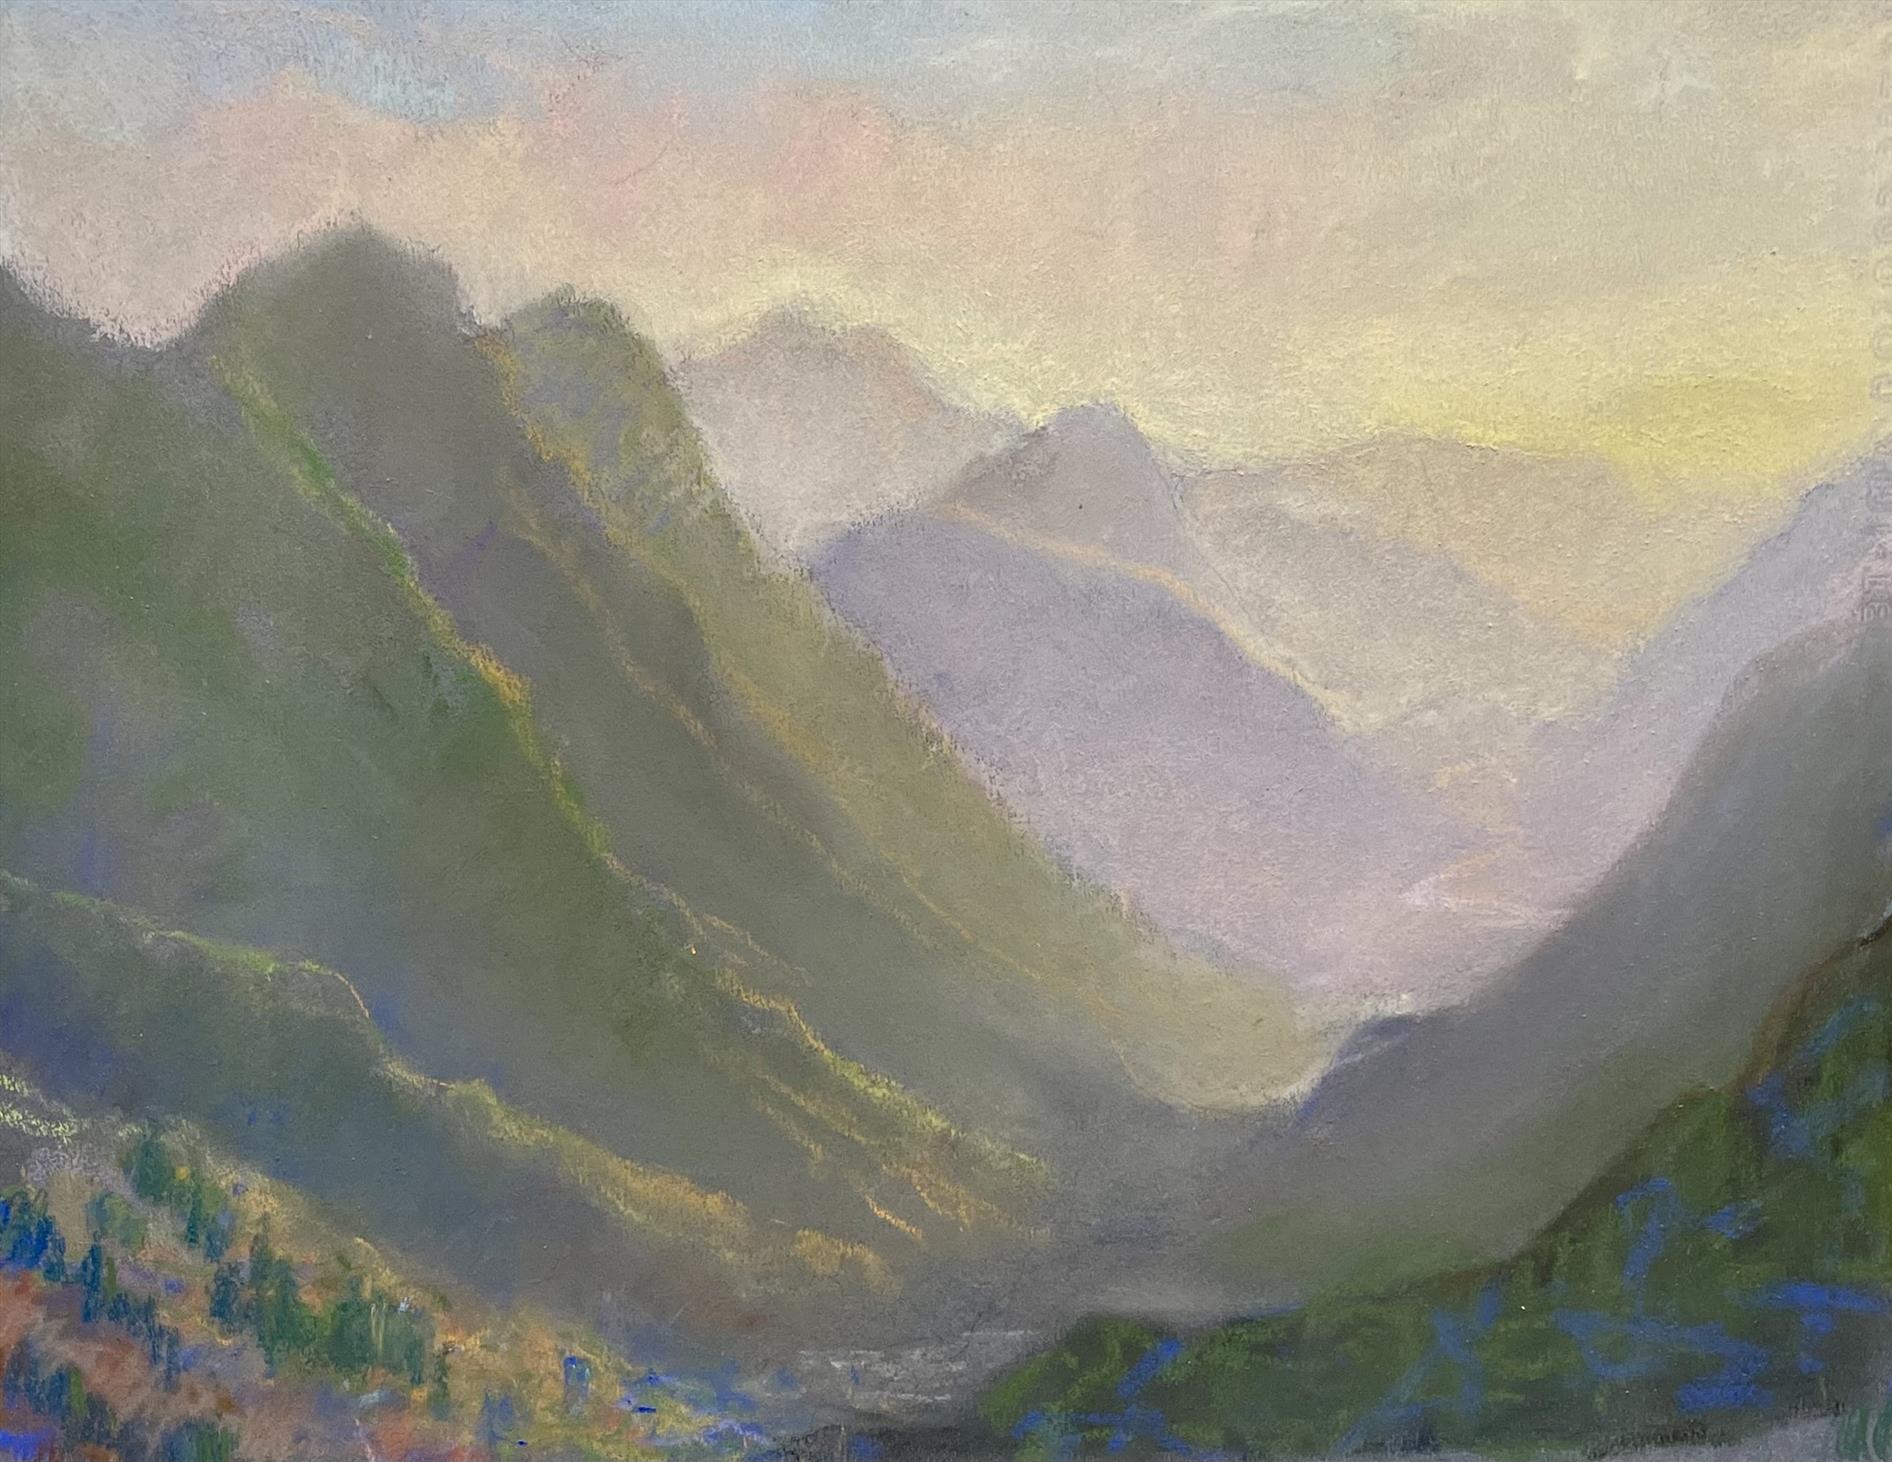 Peter Adams, “Afternoon Haze; Looking Down the Arroyo Seco from Mount Wilson,” Pastel, 12 x 16 inches, Collection of the Artist